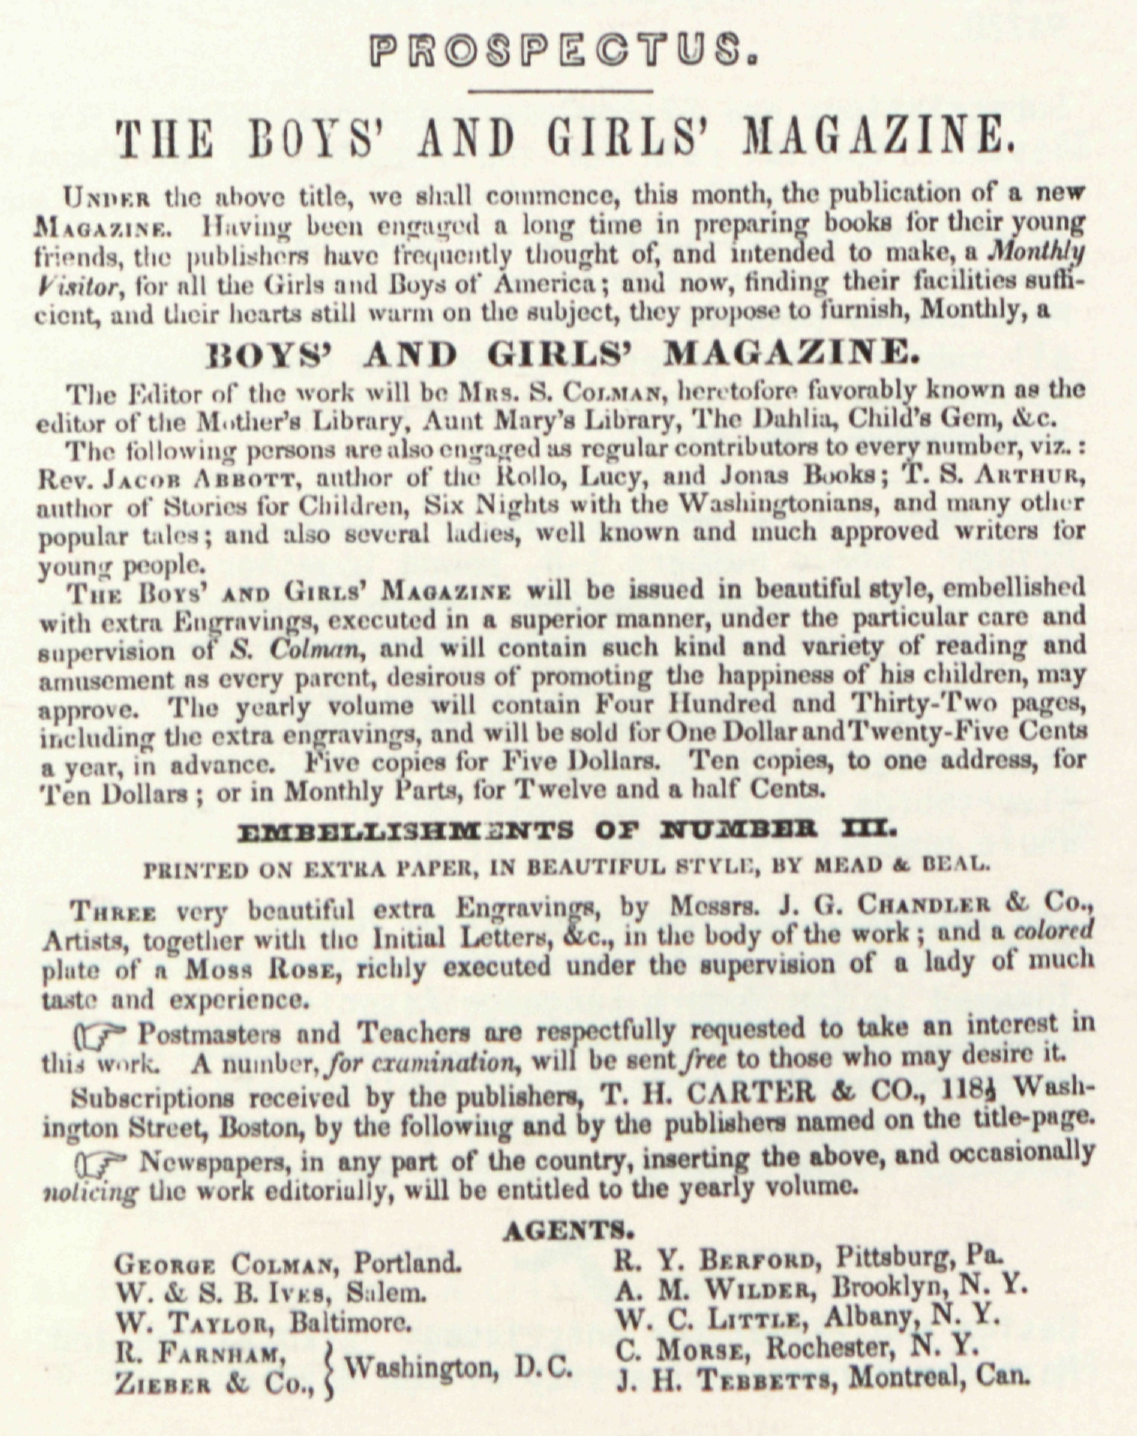 PROSPECTUS.
                	THE BOYS’ AND GIRLS’ MAGAZINE.
                	
                	UNDER the above title, we shall commence, this month, the publication of a new
                	MAGAZINE. Having been engaged a long time in preparing books for their young
                	friends, the publishers have frequently thought of, and intended to make, a Monthly
                	Visitor, for all the Girls and Boys of America; and now, finding their facilities sufficient,
                	and their hearts still warm on the subject, they propose to furnish, Monthly, a
                	BOYS’ AND GIRLS’ MAGAZINE.
                	
                	The Editor of the work will be MRS. S. COLMAN, heretofore favorably known as the
                	editor of the Mother’s Library, Aunt Mary’s Library, The Dahlia, Child’s Gem, &c.
                	
                	The following persons are also engaged as regular contributors to every number, viz.:
                	Rev. JACOB ABBOTT, author of the Rollo, Lucy, and Jonas Books; T. S. ARTHUR,
                	author of Stories for Children, Six Nights with the Washingtonians, and as many other
                	popular tales; and also several ladies, well known and much approved writers for
                	young people.
                	
                	THE BOYS’ AND GIRLS’ MAGAZINE will be issued in beautiful style, embellished
                	with extra Engravings, executed in a superior manner, under the particular care and
                	supervision of S. Colman, and will contain such kind and variety of reading and
                	amusement as every parent, desirous of promoting the happiness of his children, may
                	approve. The yearly volume will contain Four Hundred and Thirty-Two pages,
                	including the extra engravings, and will be sold for One Dollar and Twenty-Five Cents
                	a year, in advance. Five copies for Five Dollars. Ten copies, to one address, for
                	Ten Dollars; or in Monthly Parks, for Twelve and a half Cents.
                	
                	EMBELLISHMENTS OF NUMBER III.
                	PRINTED ON EXTRA PAPER, IN BEAUTIFUL STYLE, BY MEAD & BEAL.
                	
                	THREE very beautiful extra Engravings, by Messrs. J. G. CHANDLER & Co.,
                	Artists, together with the Initial Letters, &c., in the body of the work; and a colored
                	plate of a Moss ROSE, richly executed under the supervision of a lady of much
                	taste and experience.
                	
                	☞ Postmasters and Teachers are respectfully requested to take an interest in
                	this work. A number, for examination, will be sent free to those who may desire it.
                	
                	Subscriptions received by the publishers, T. H. CARTER & CO., 118½ Washington
                	Street, Boston, by the following and by the publishers named on the title-page.
                	
                	☞ Newspapers, in any part of the country, inserting the above, and occasionally
                	noticing the work editorially, will be entitled to the yearly volume.
                	
                	AGENTS.
                	
                	GEORGE COLMAN, Portland.
                	W. & S. B. IVES, Salem.
                	W. TAYLOR, Baltimore.
                	R. FARNHAM,
                	ZIEBER & Co.,
                	} Washington, D.C.
                	
                	R. Y. BERFORD, Pittsburg, Pa.
                	A. M. WILDER, Brooklyn, N. Y.
                	W. C. LITTLE, Albany, N. Y.
                	C. MORSE, Rochester, N. Y.
                	J. H. TEBBETTS, Montreal, Can.